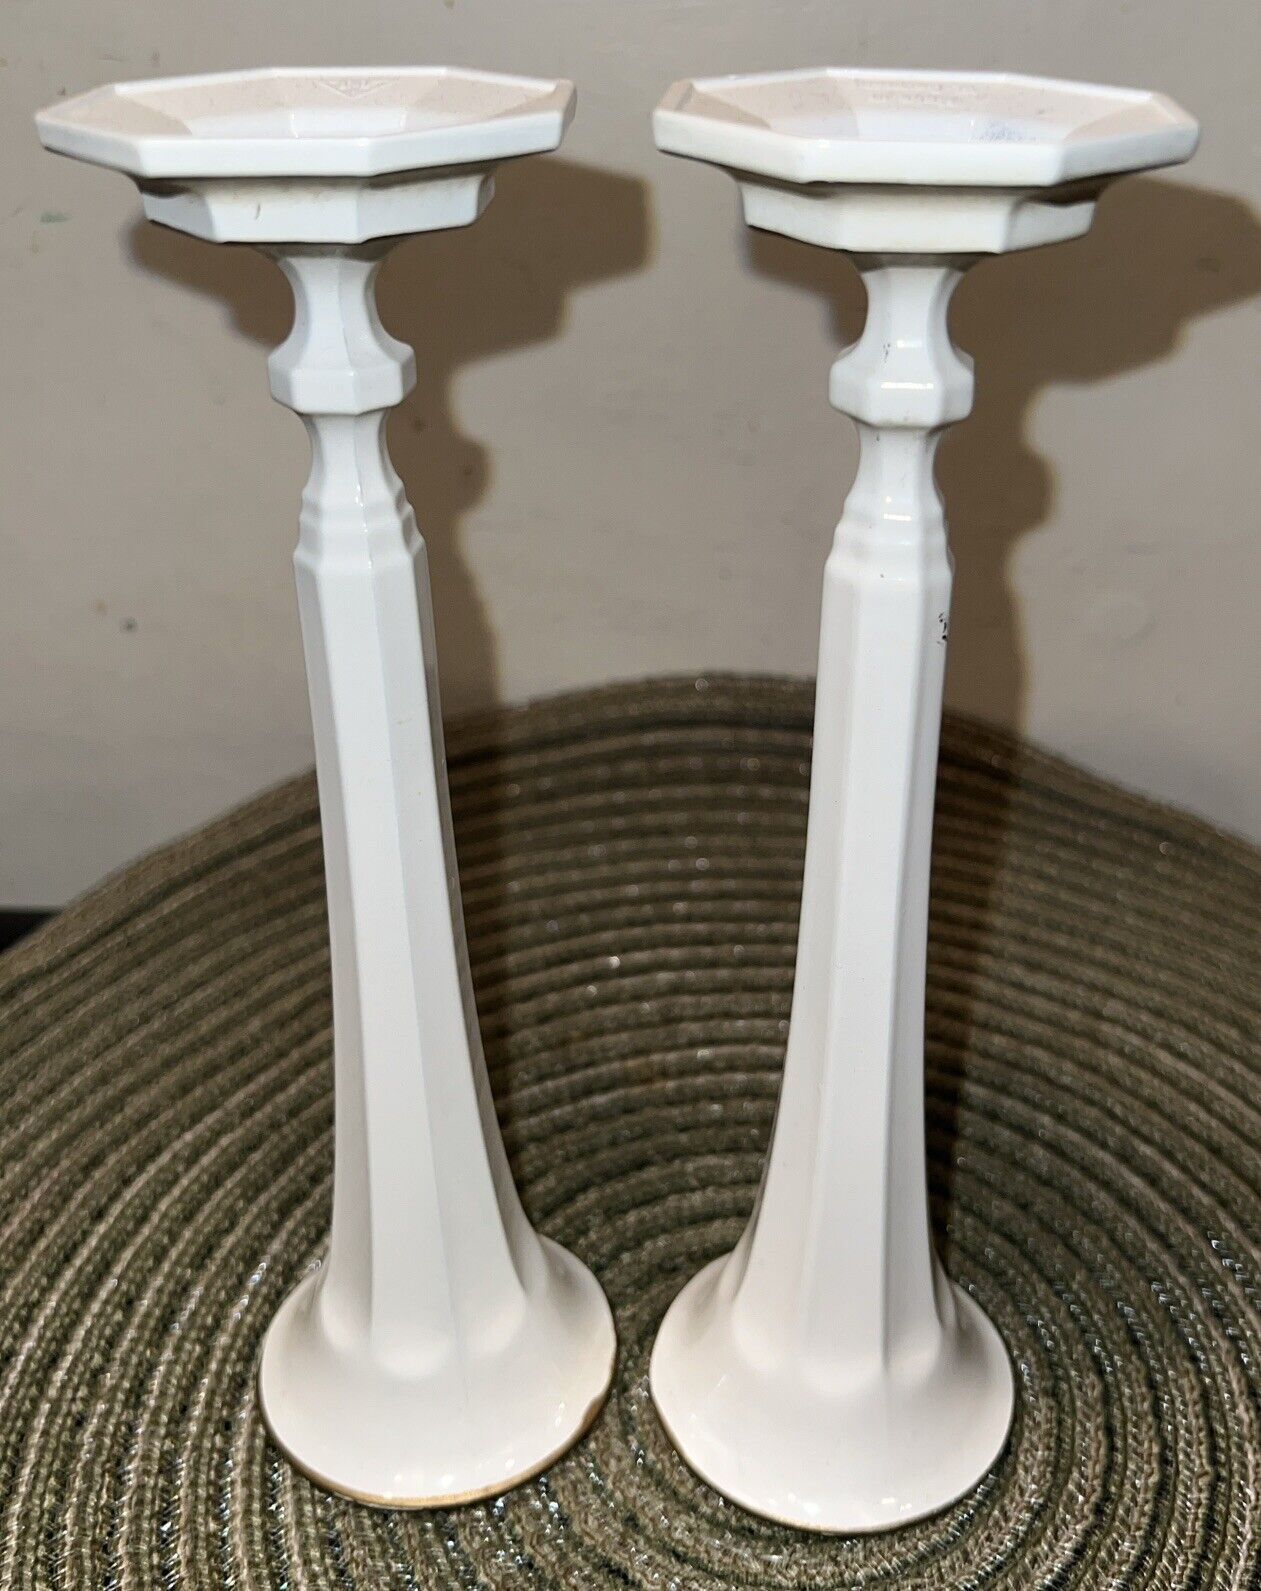 Pair 2 BMF Metal Probably Pewter White Candlesticks From W. Germany, Decades Old